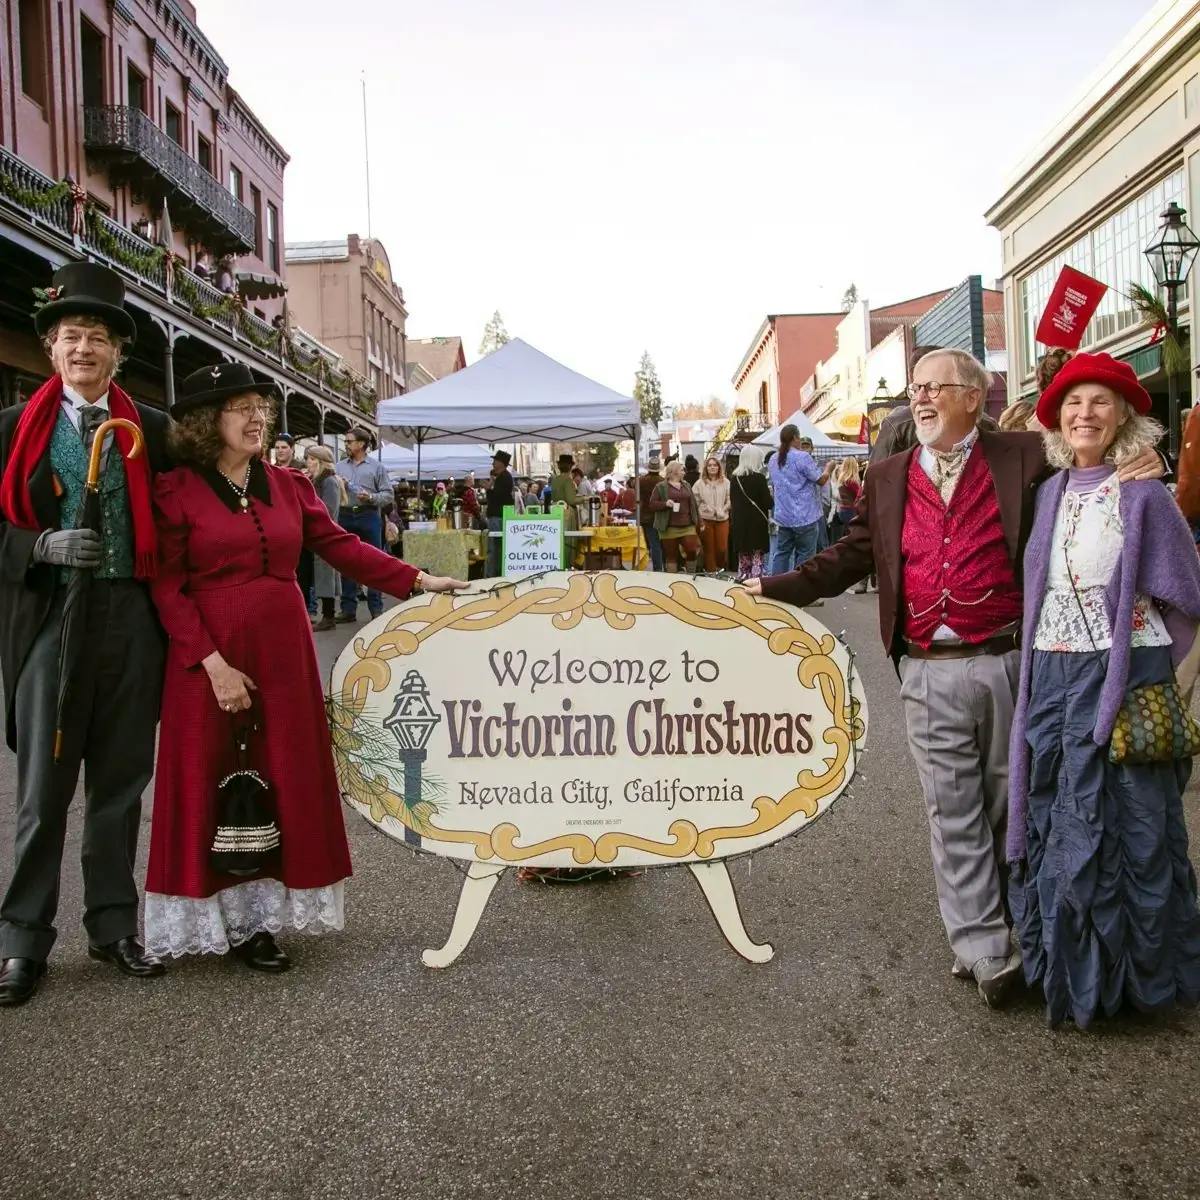 Two couples in Victorian dress posing next to the “Welcome to Victorian Christmas” sign in Nevada City, CA